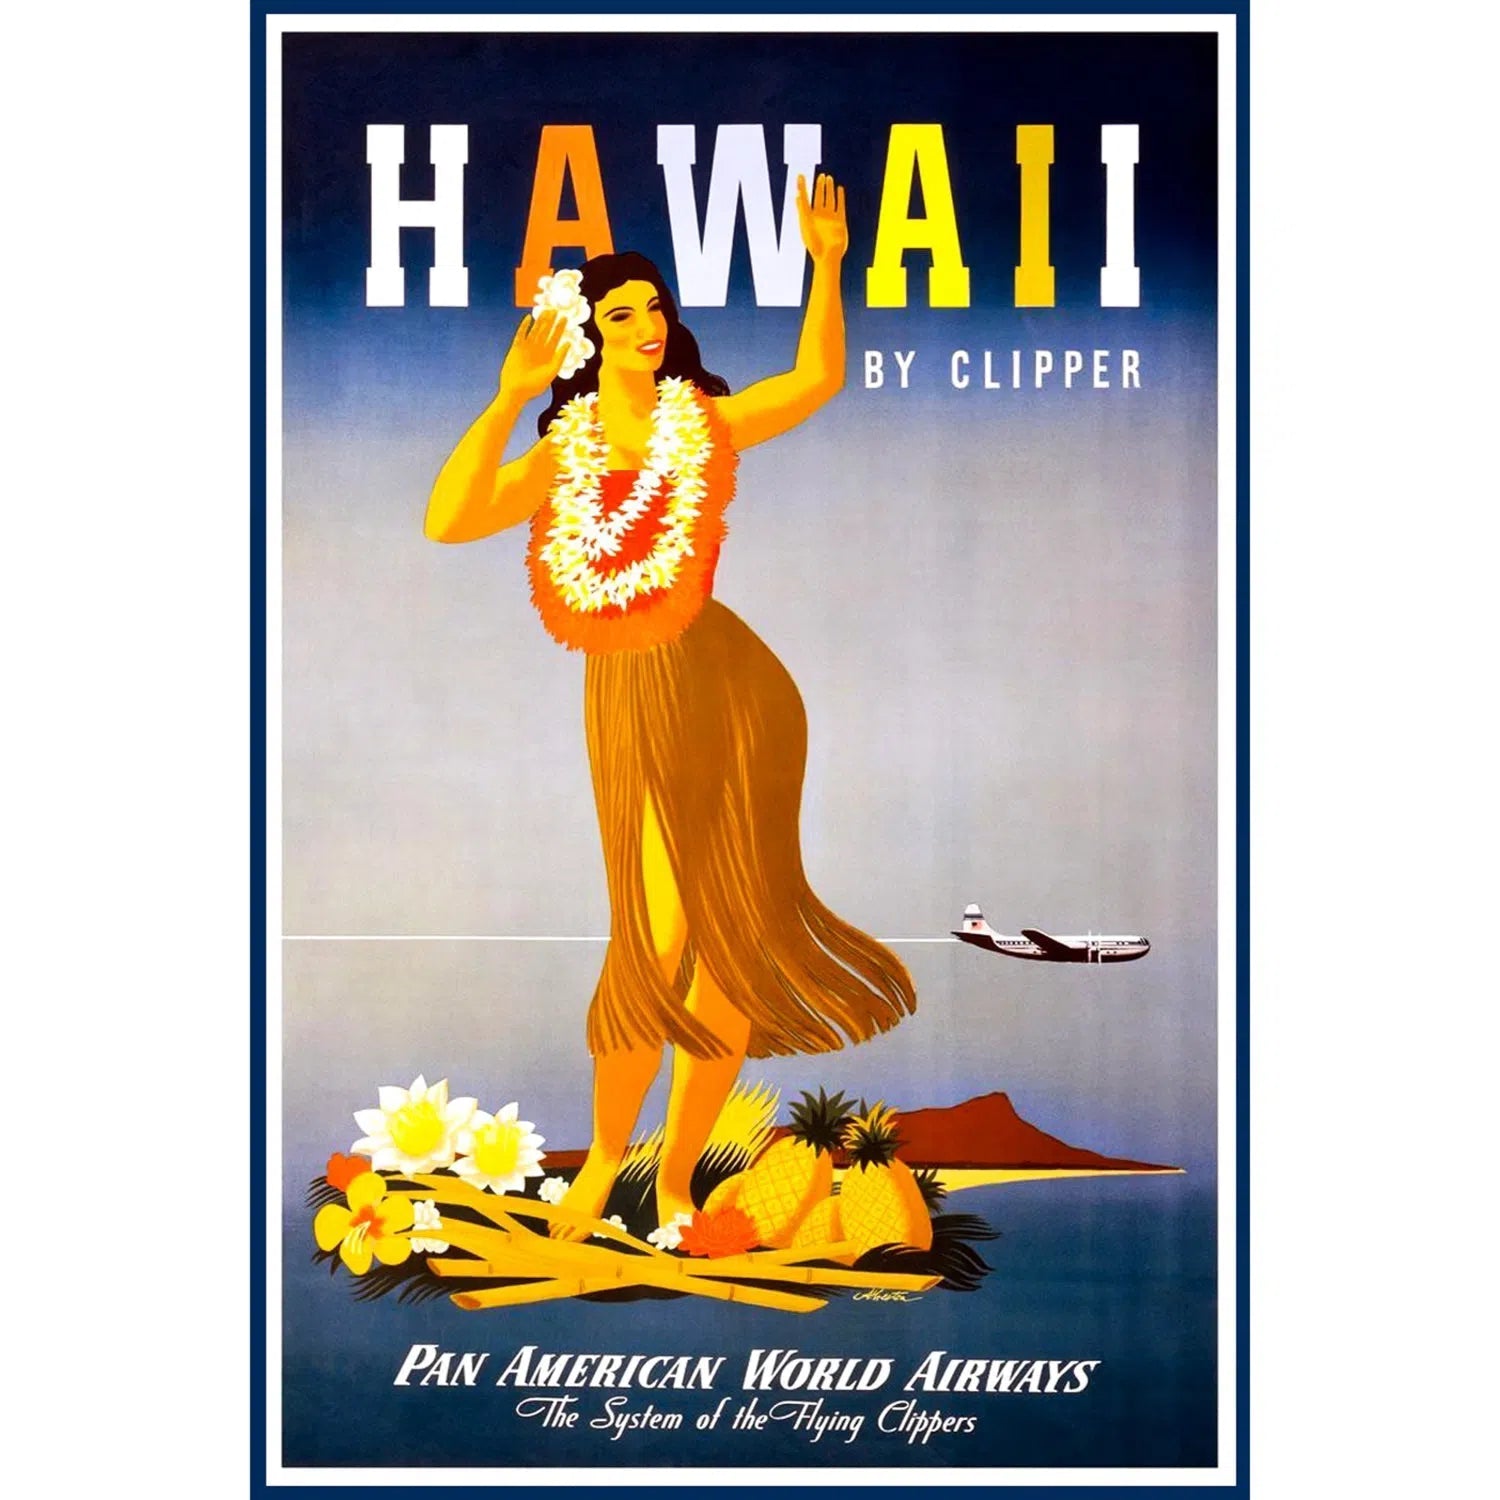 Hawaii by clipper - Pan American AIrways-Imagesdartistes